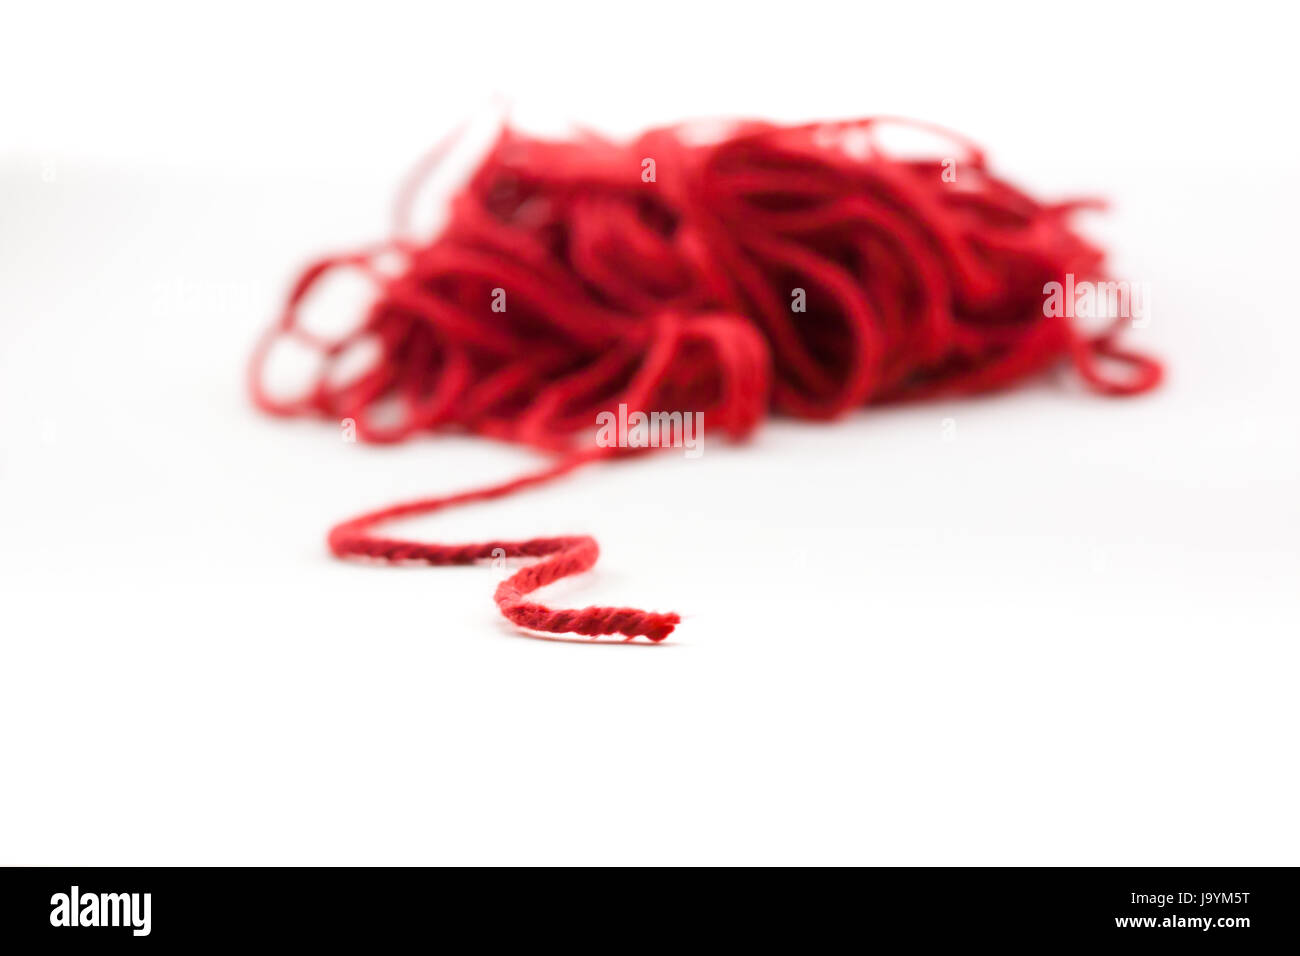 Tangled pile of red yarn with a single piece leading out, isolated on white. Stock Photo